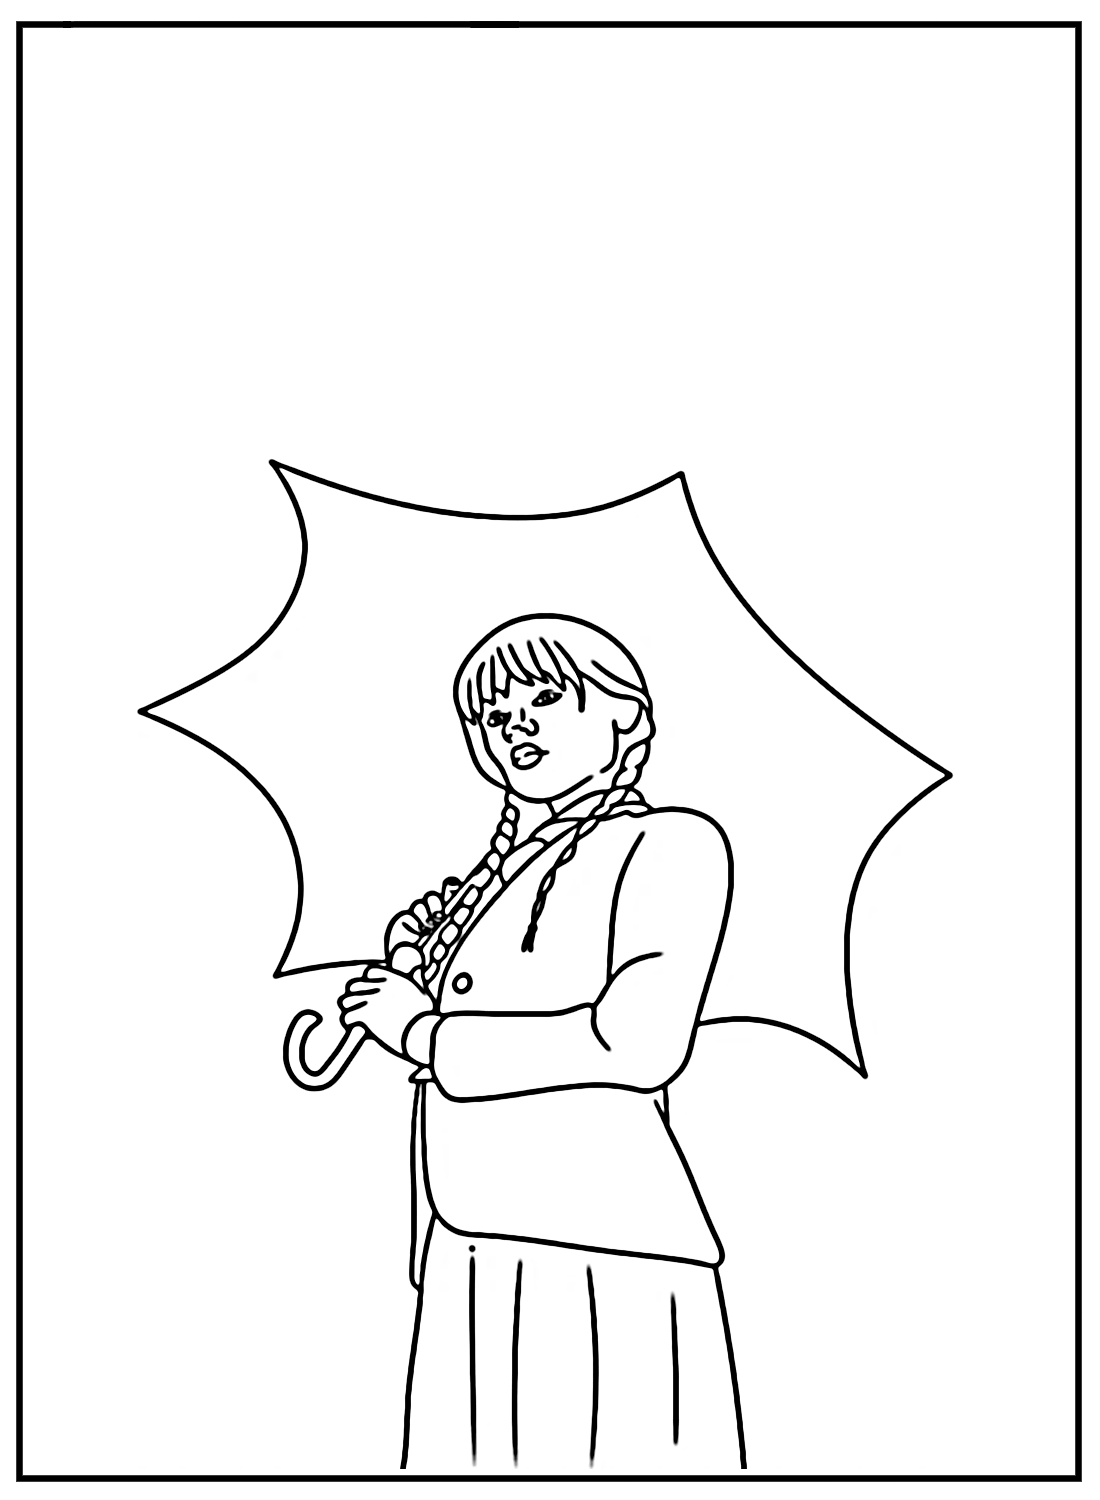 Wednesday Addams with Umbrella Coloring Page